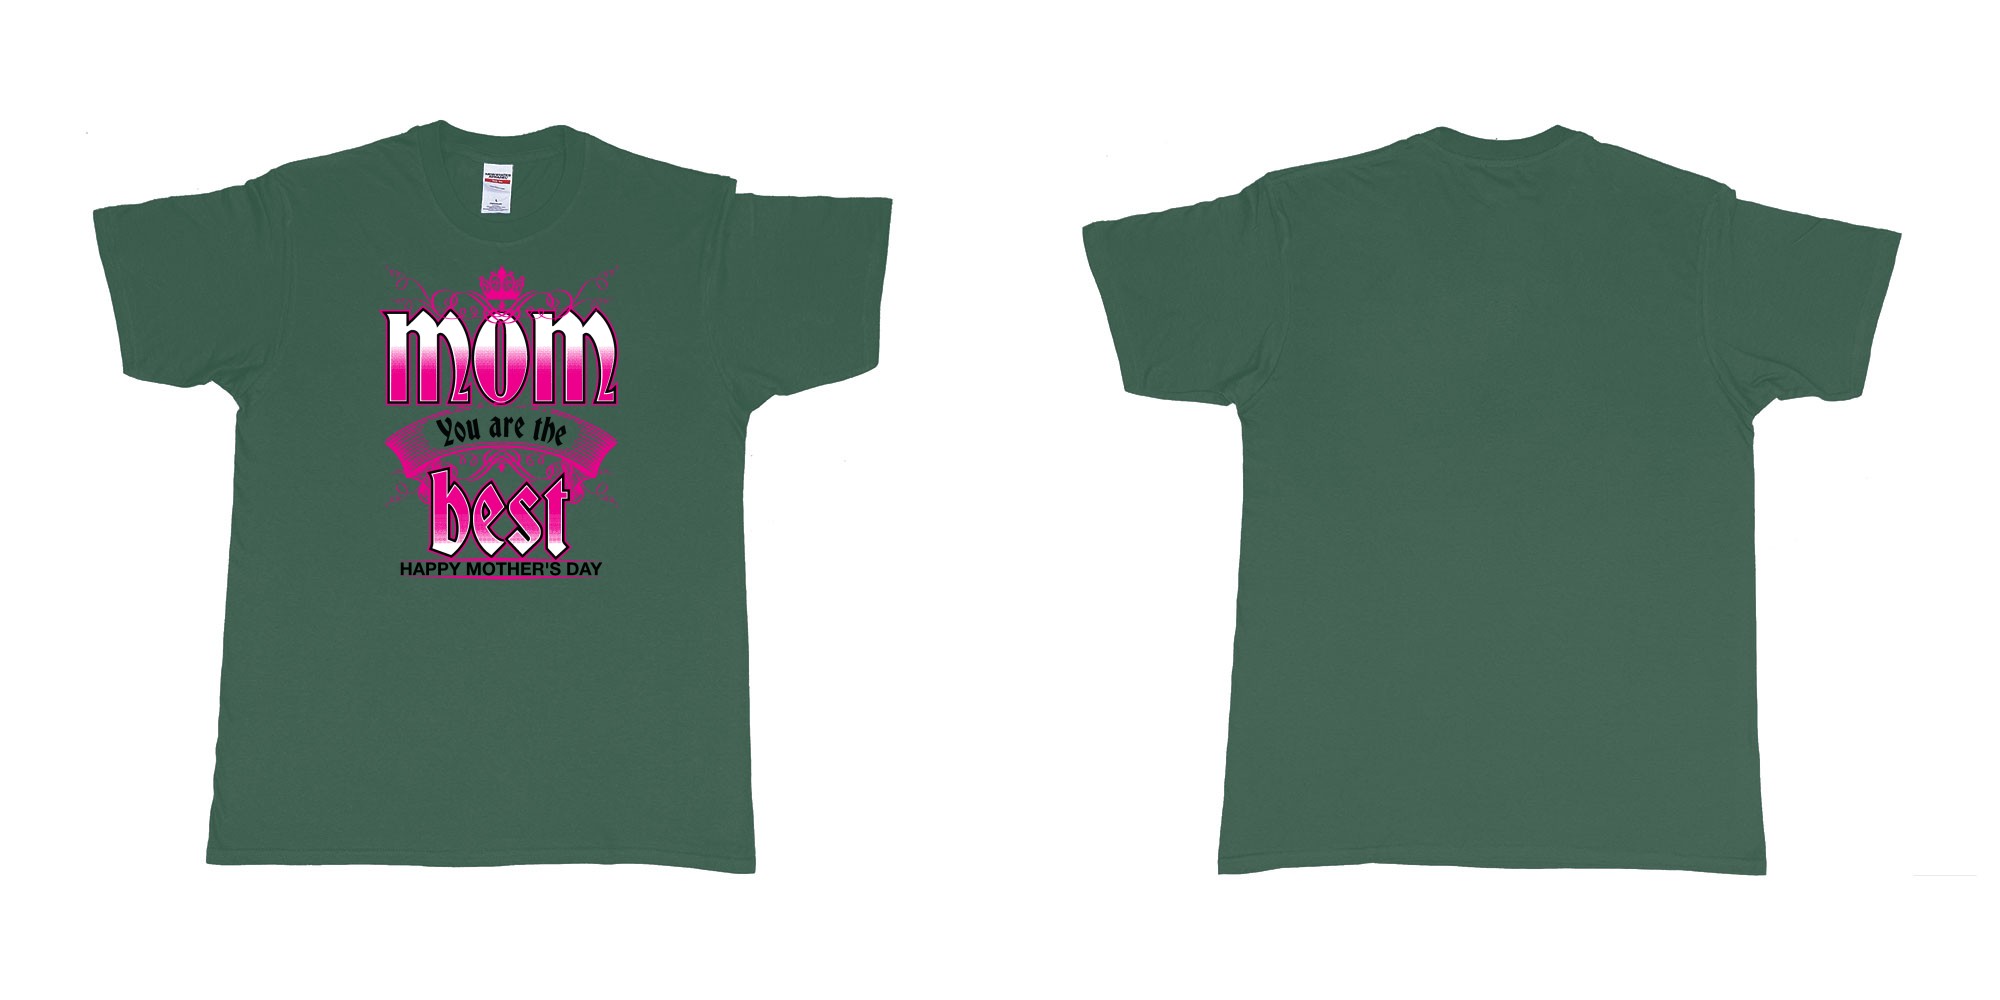 Custom tshirt design crown mom you are the best happy morthers day in fabric color forest-green choice your own text made in Bali by The Pirate Way